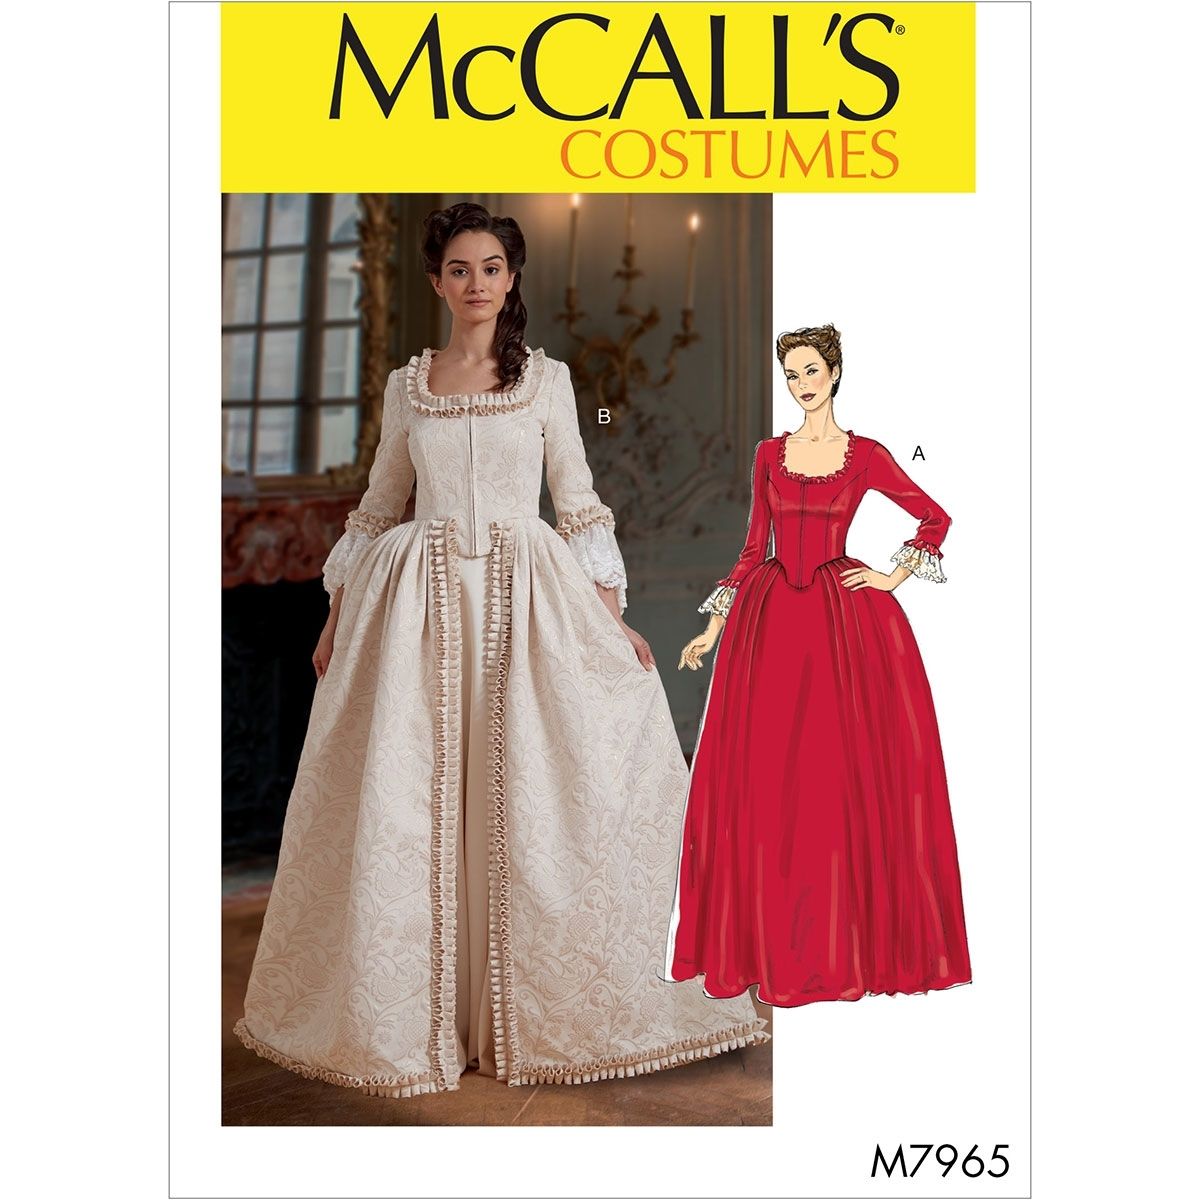 Misses Costume McCalls Sewing Pattern M7965